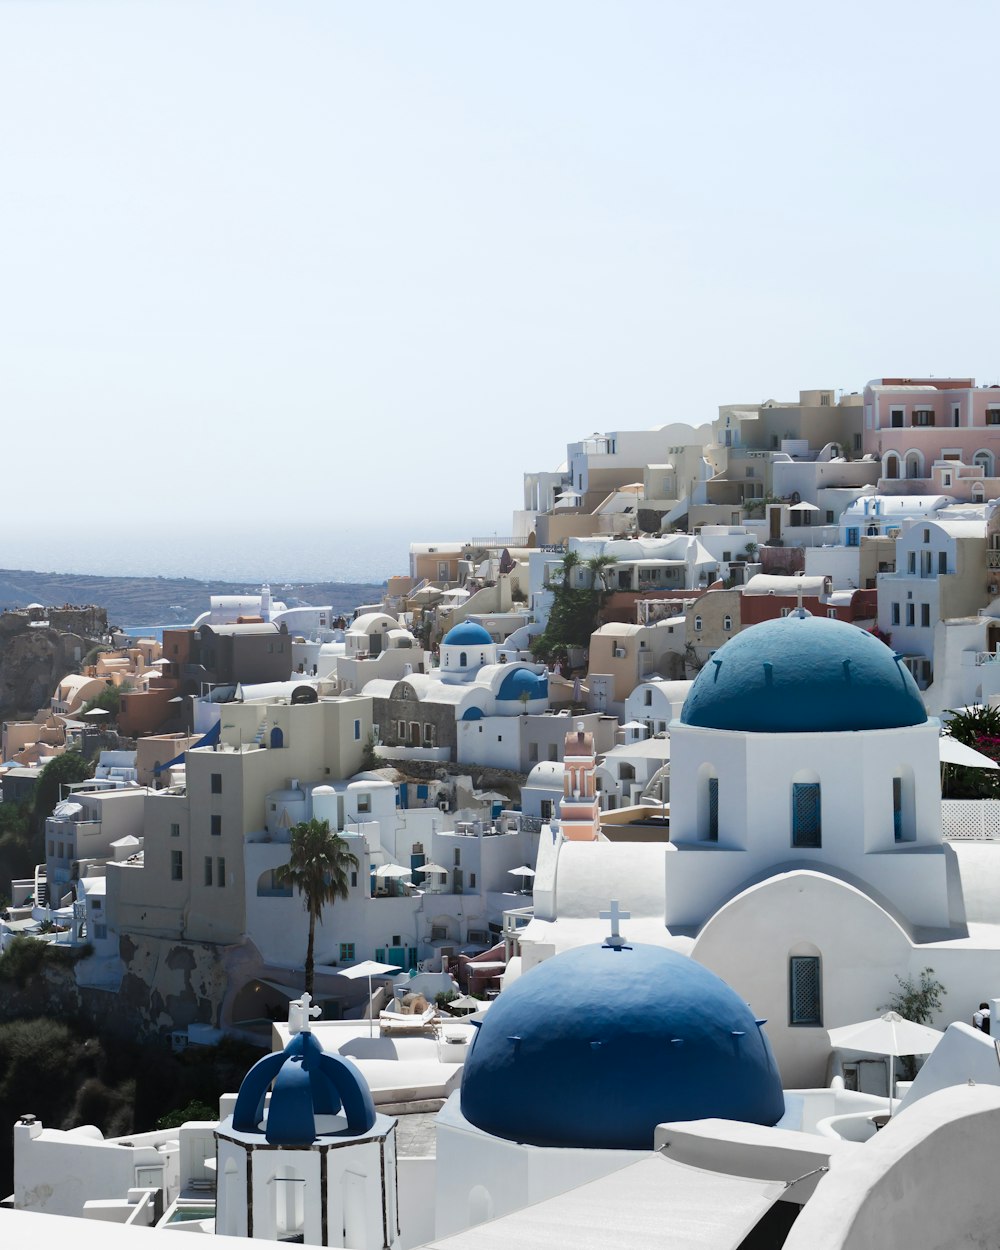 a view of a city with white buildings and blue domes